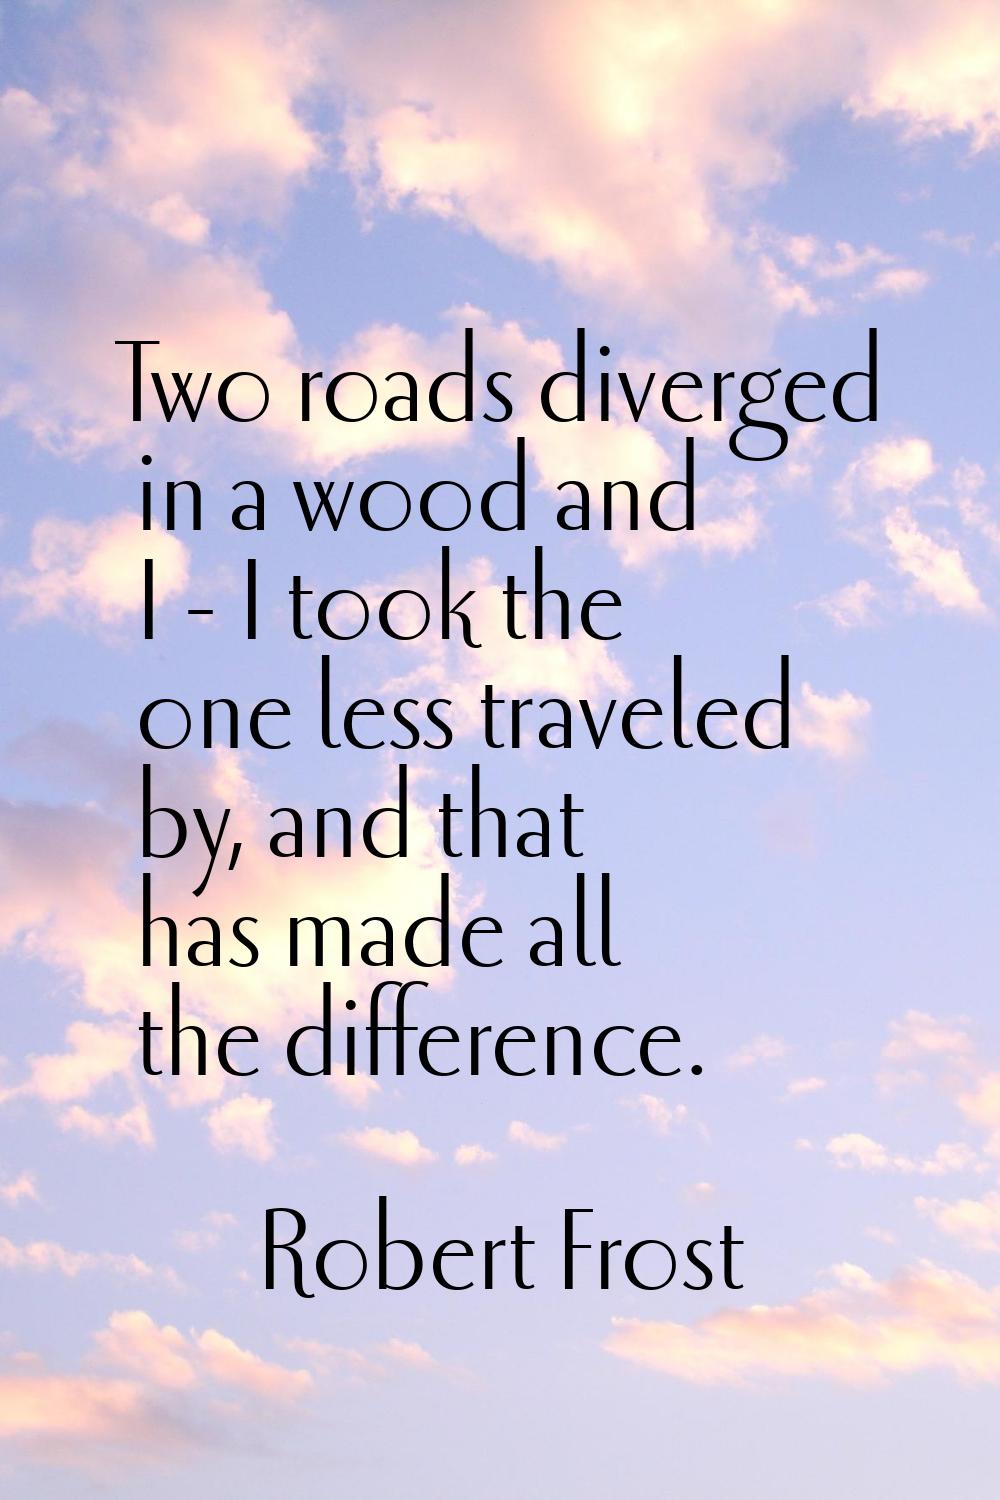 Two roads diverged in a wood and I - I took the one less traveled by, and that has made all the dif